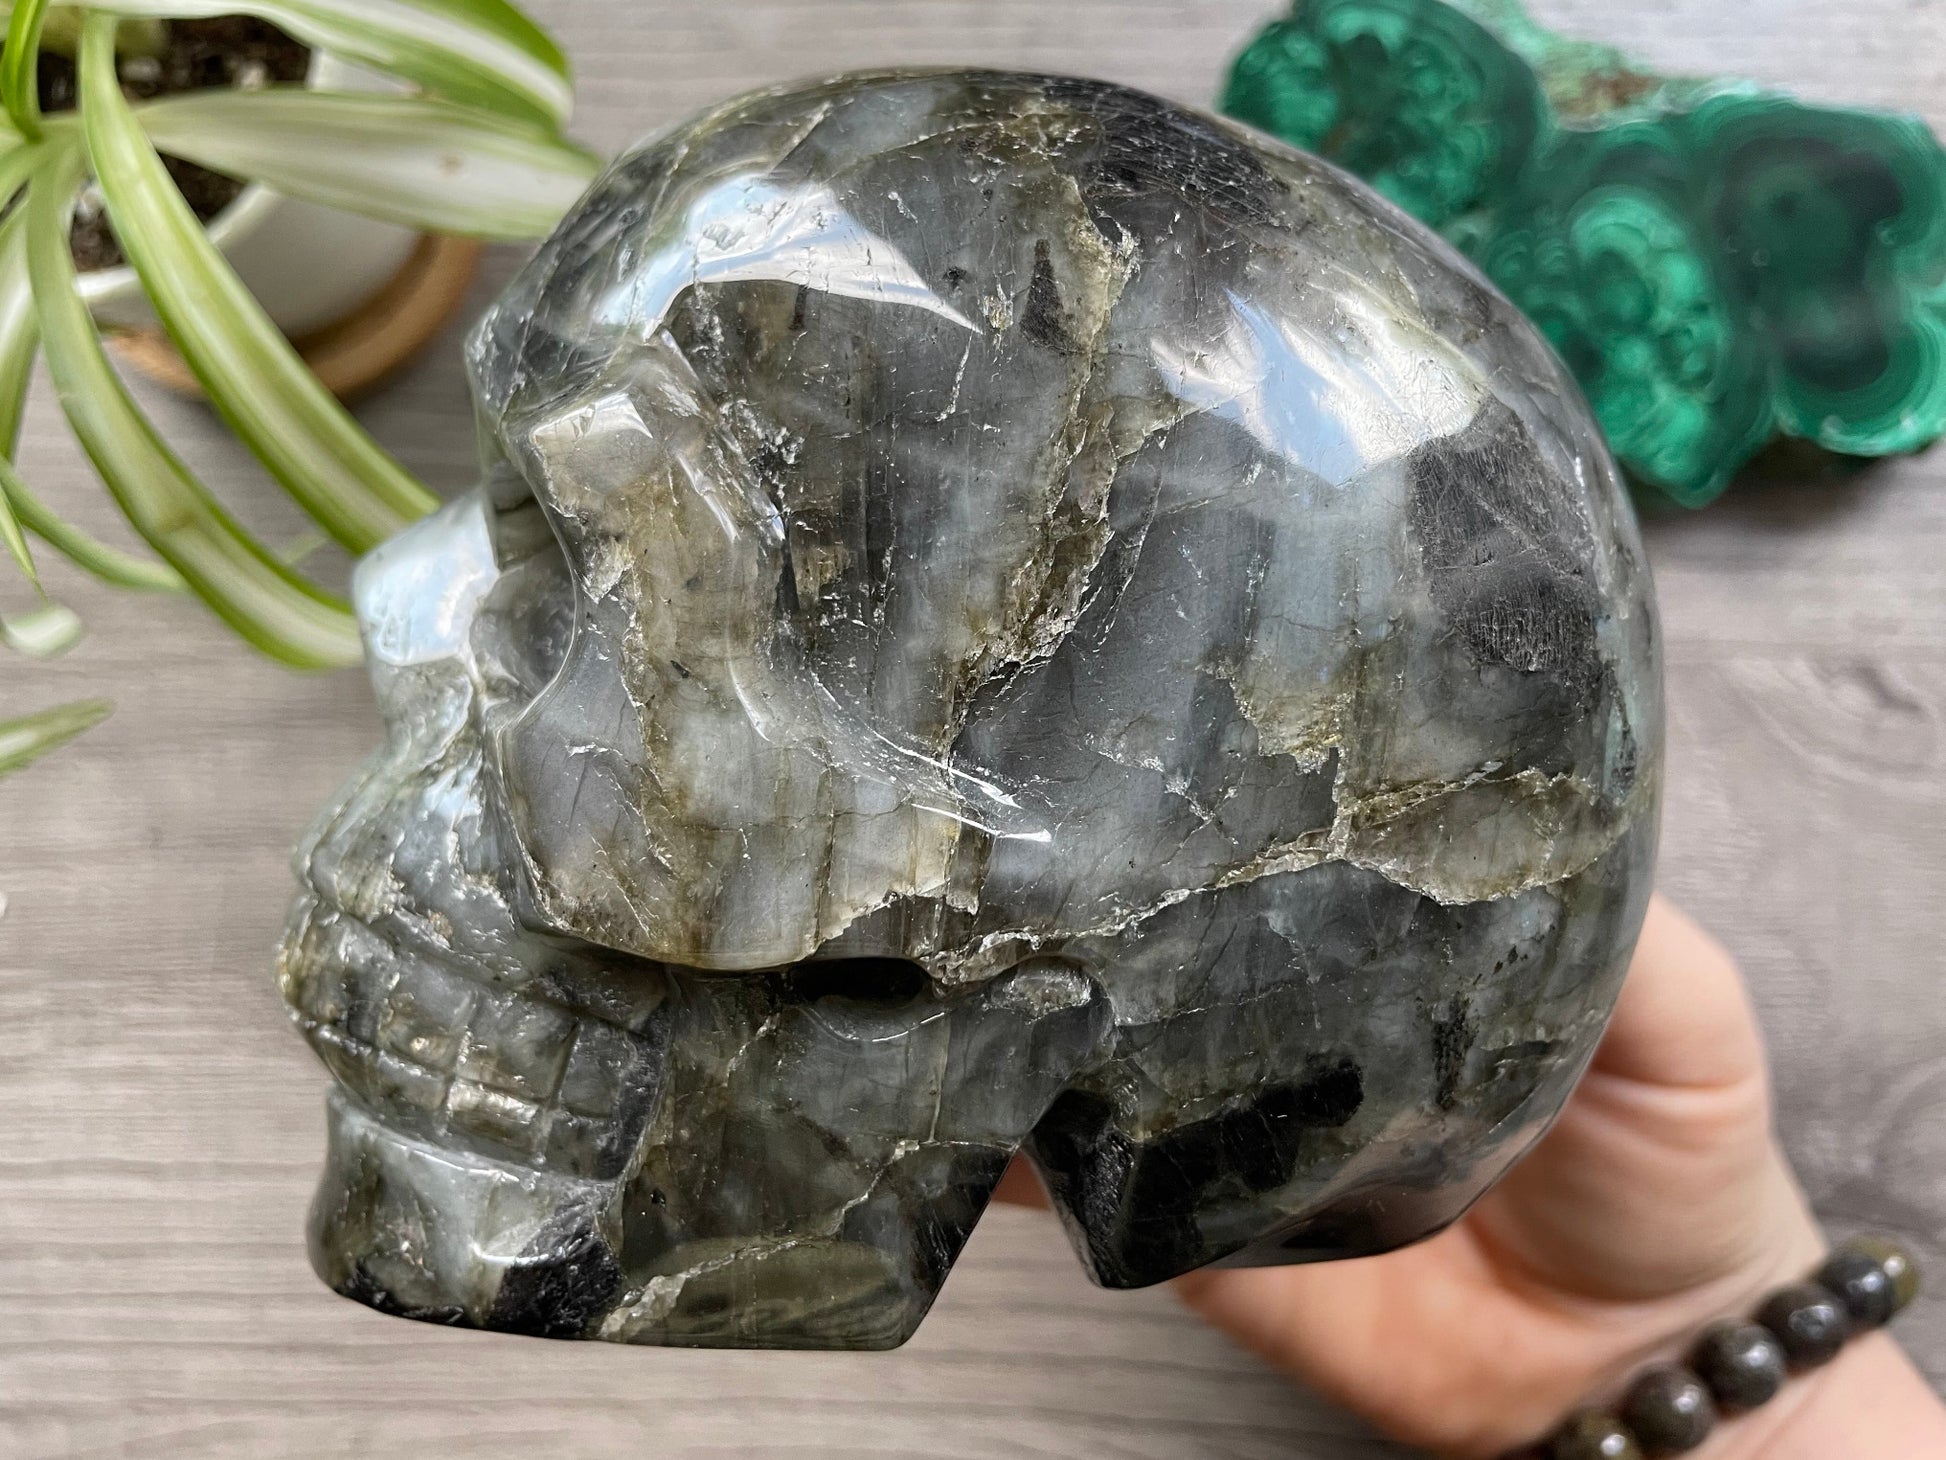 Labradorite Crystal Skull 1.2kg - The Wandering Fox Emporium, Your Metaphysical Store side 2